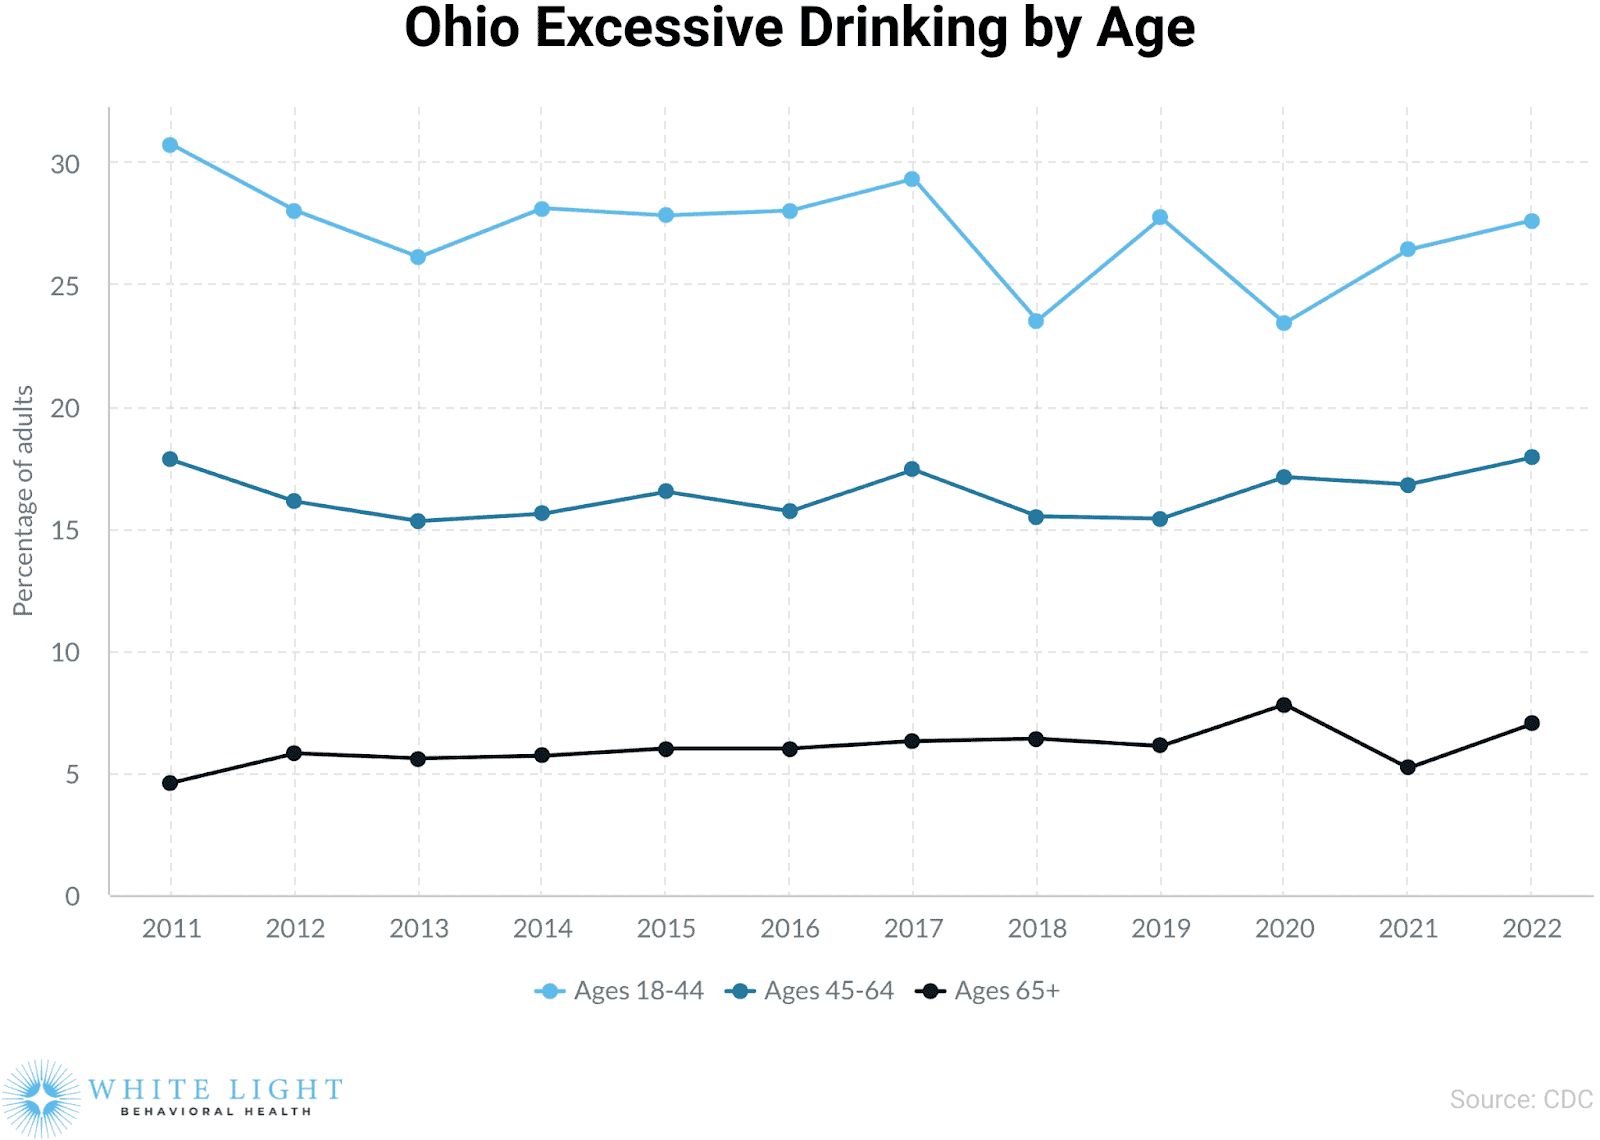 Ohio Excessive Drinking by Age